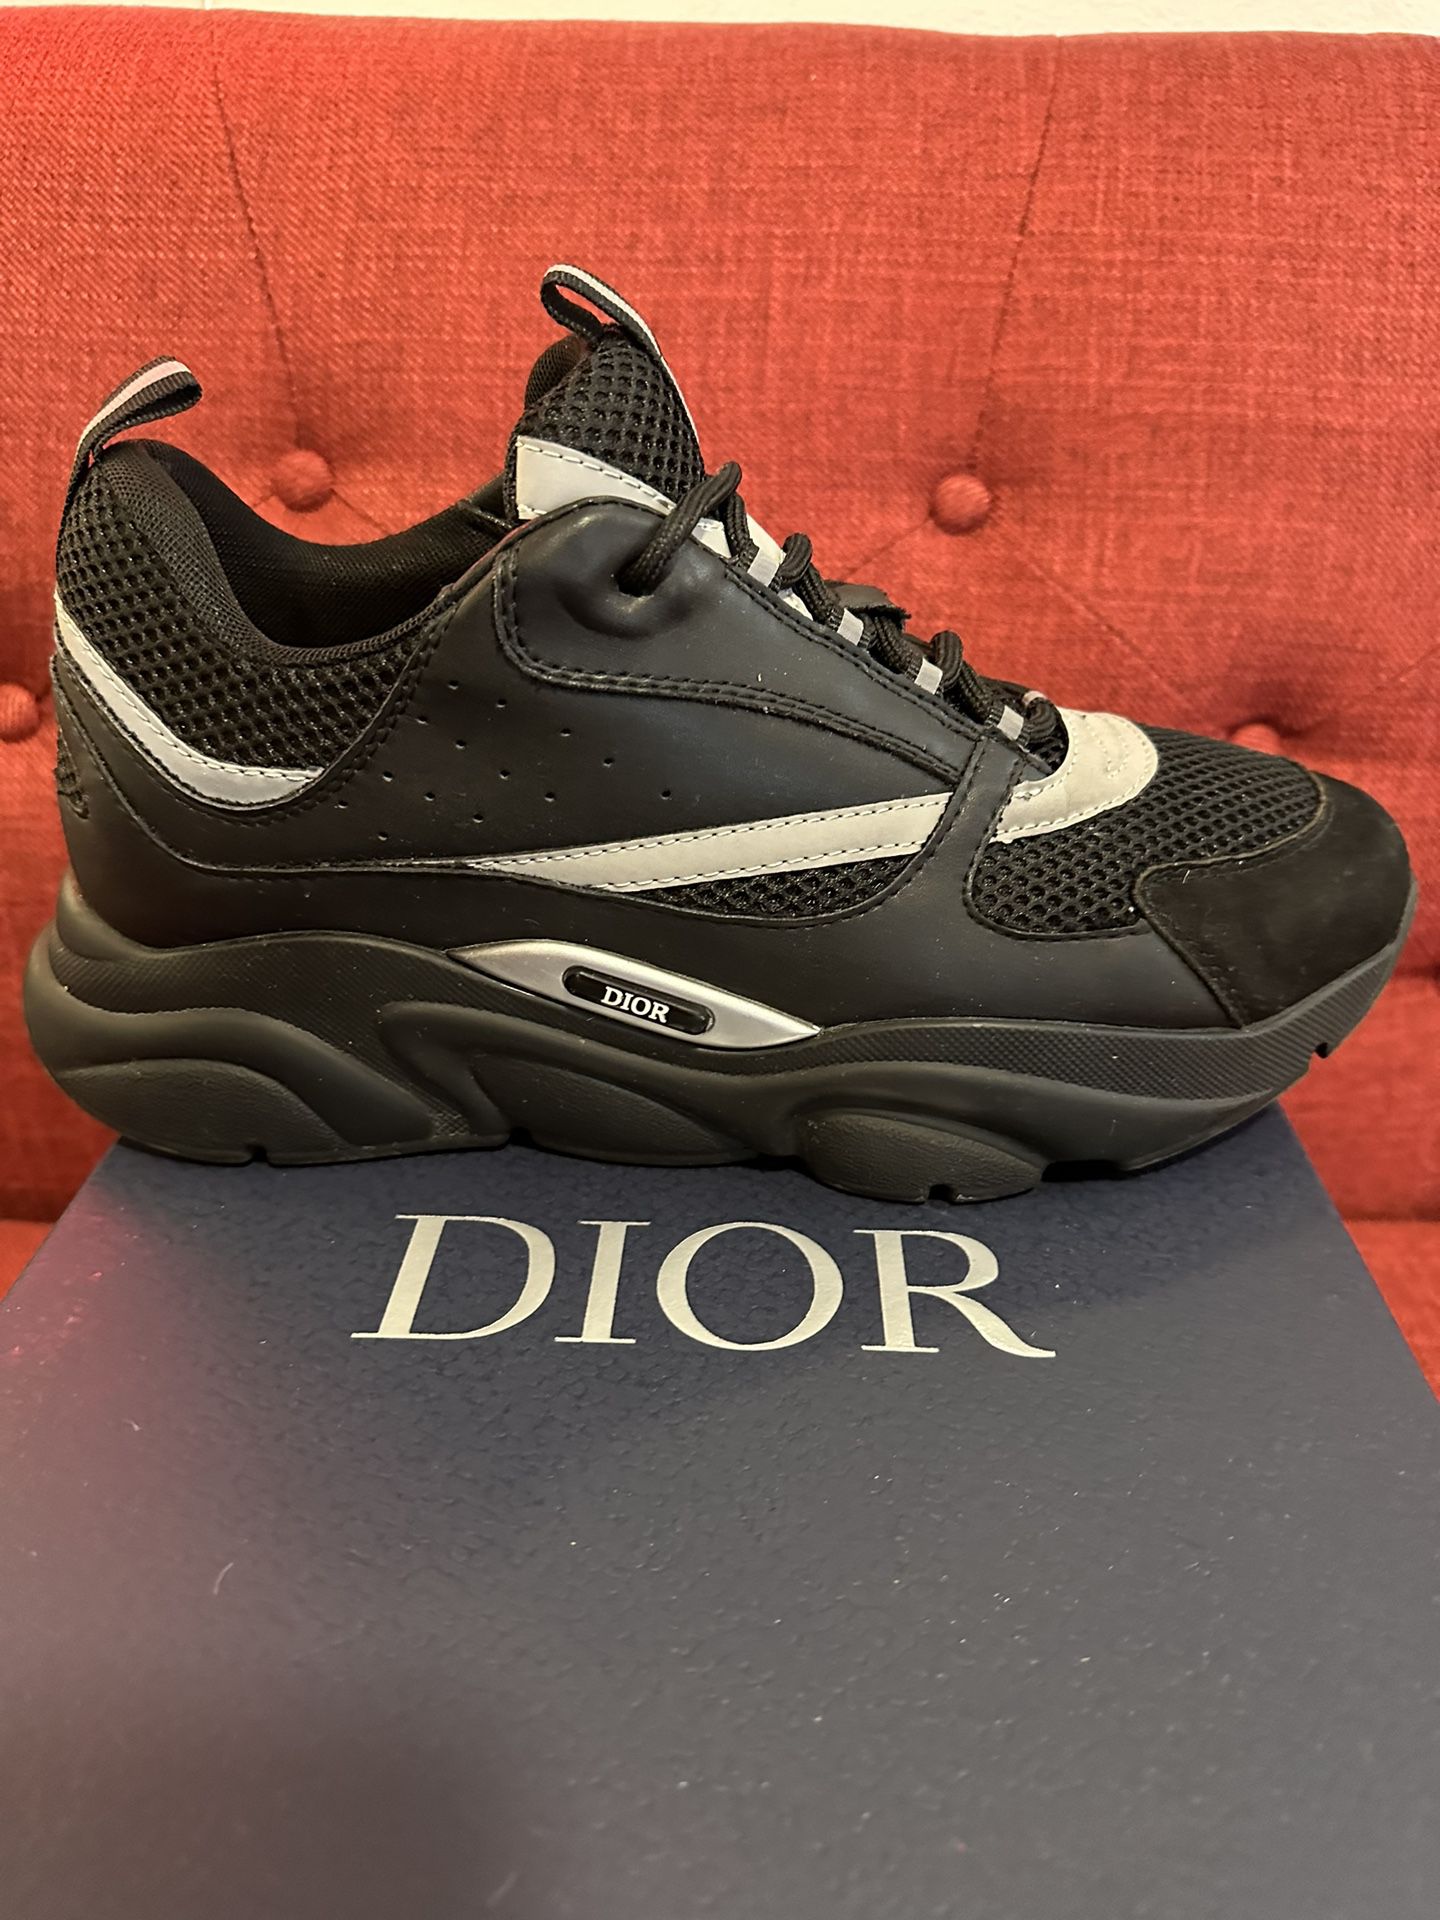 DIOR MEN B22 Chunky Sneakers w/ Tags - Black Sneakers, Shoes